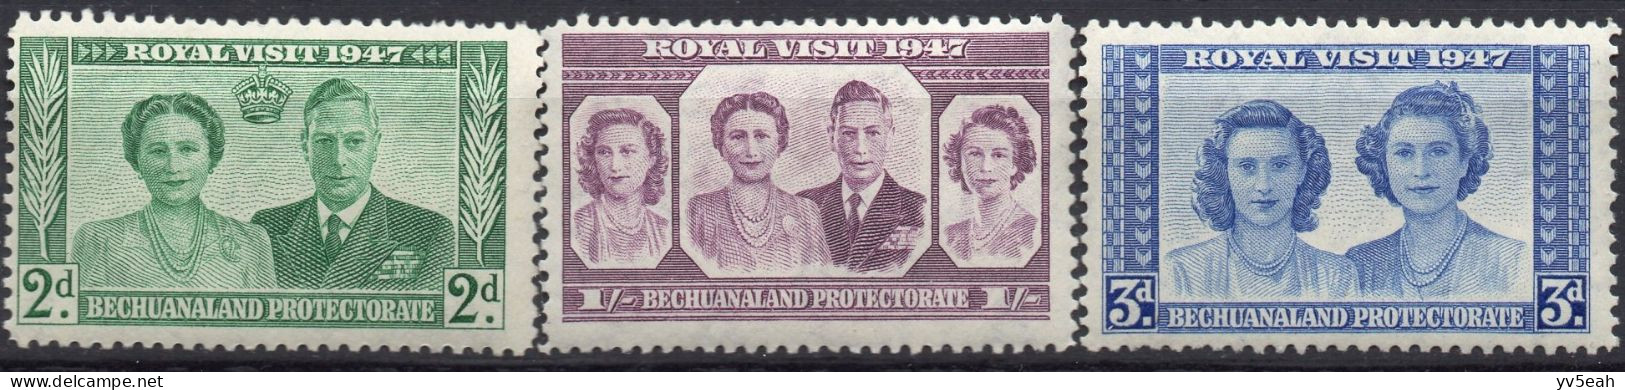 BECHUANALAND PROTECTORATE/1947/MNH/SC#144-6/KING GEORGE VI/ KGVI /ROYAL FAMILY VISIT ISSUED / PARTIAL SET - 1885-1964 Protectorado De Bechuanaland